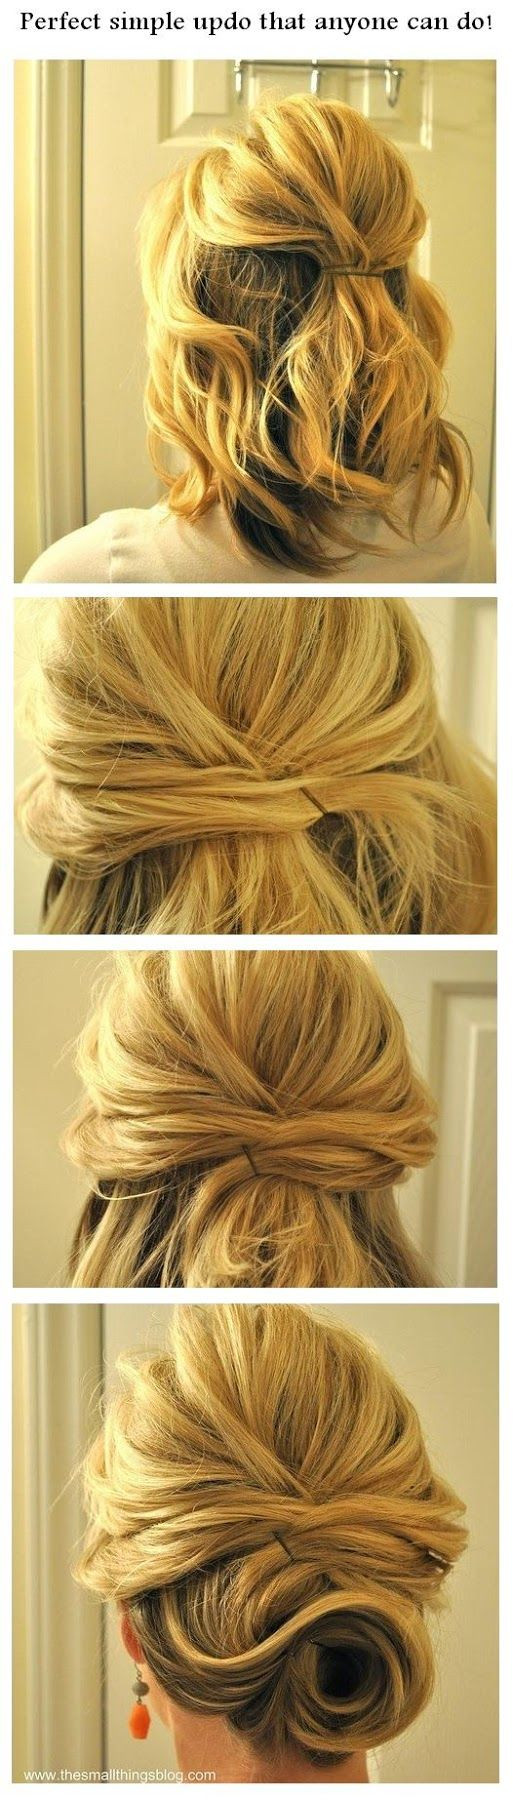 Easy Hairstyles For Medium Hair Step By Step
 10 Amazing step by step hairstyles for medium length hair